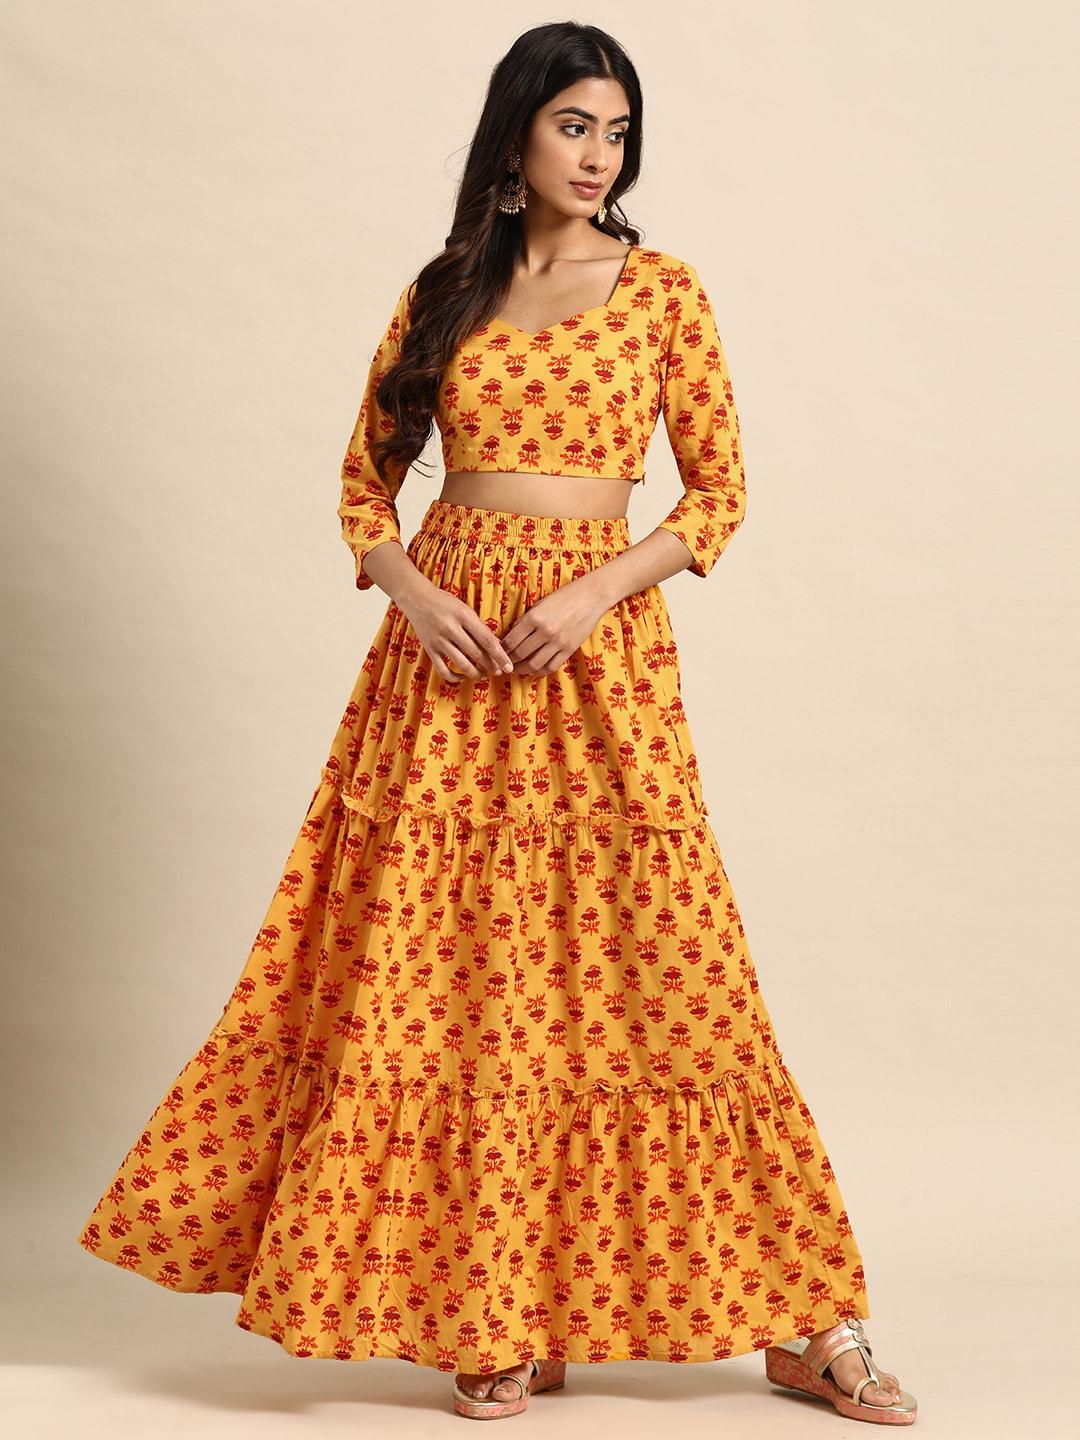 all about you Cotton Printed Ready to Wear Lehenga Choli